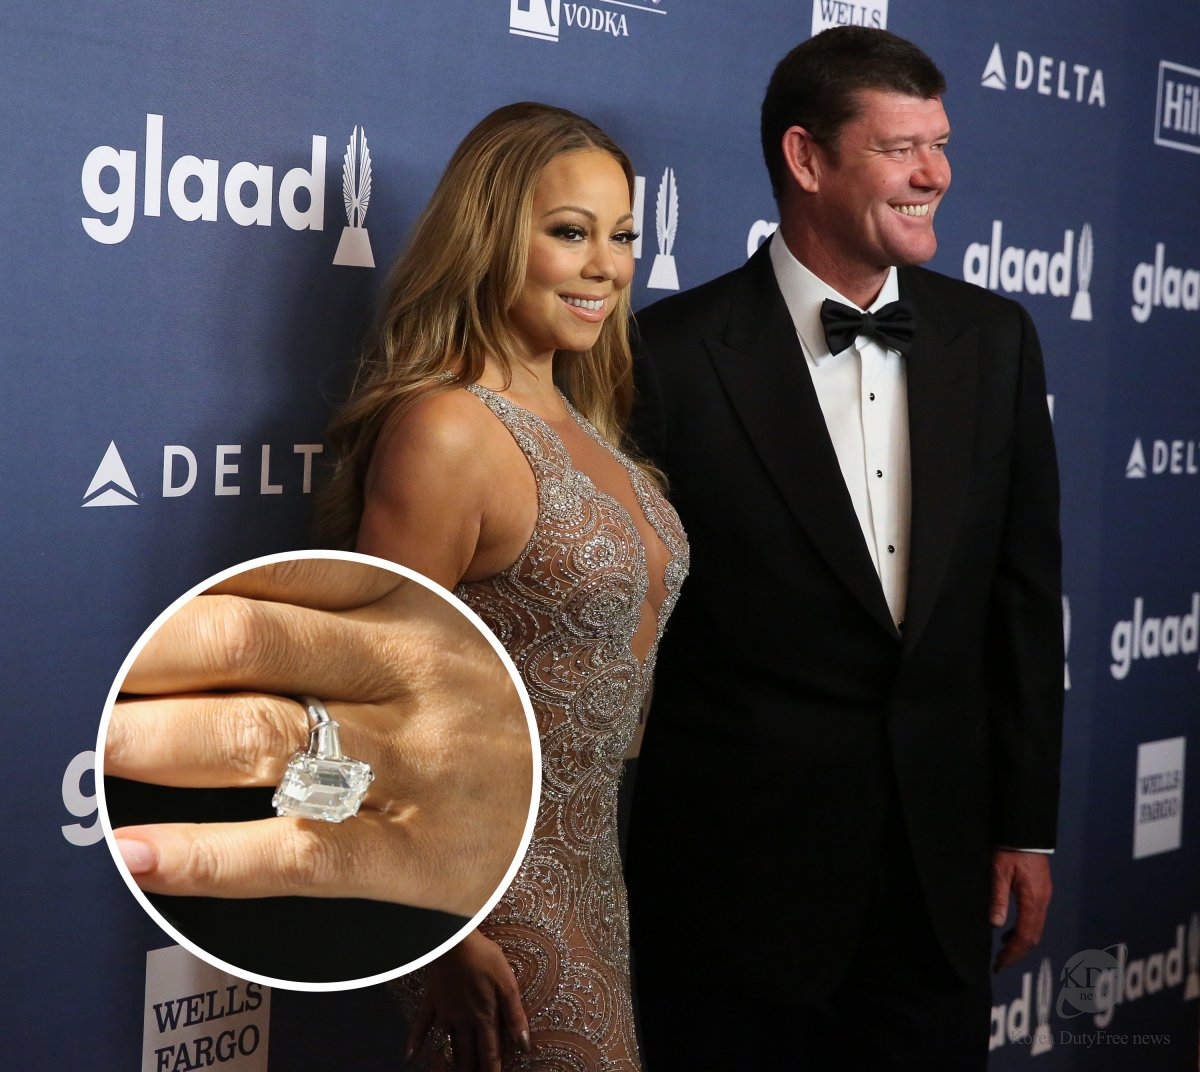 mariah-carey-and-billionaire-james-packer-recently-broke-the-record-with-a-whopping-35-carat-emerald-cut-diamond